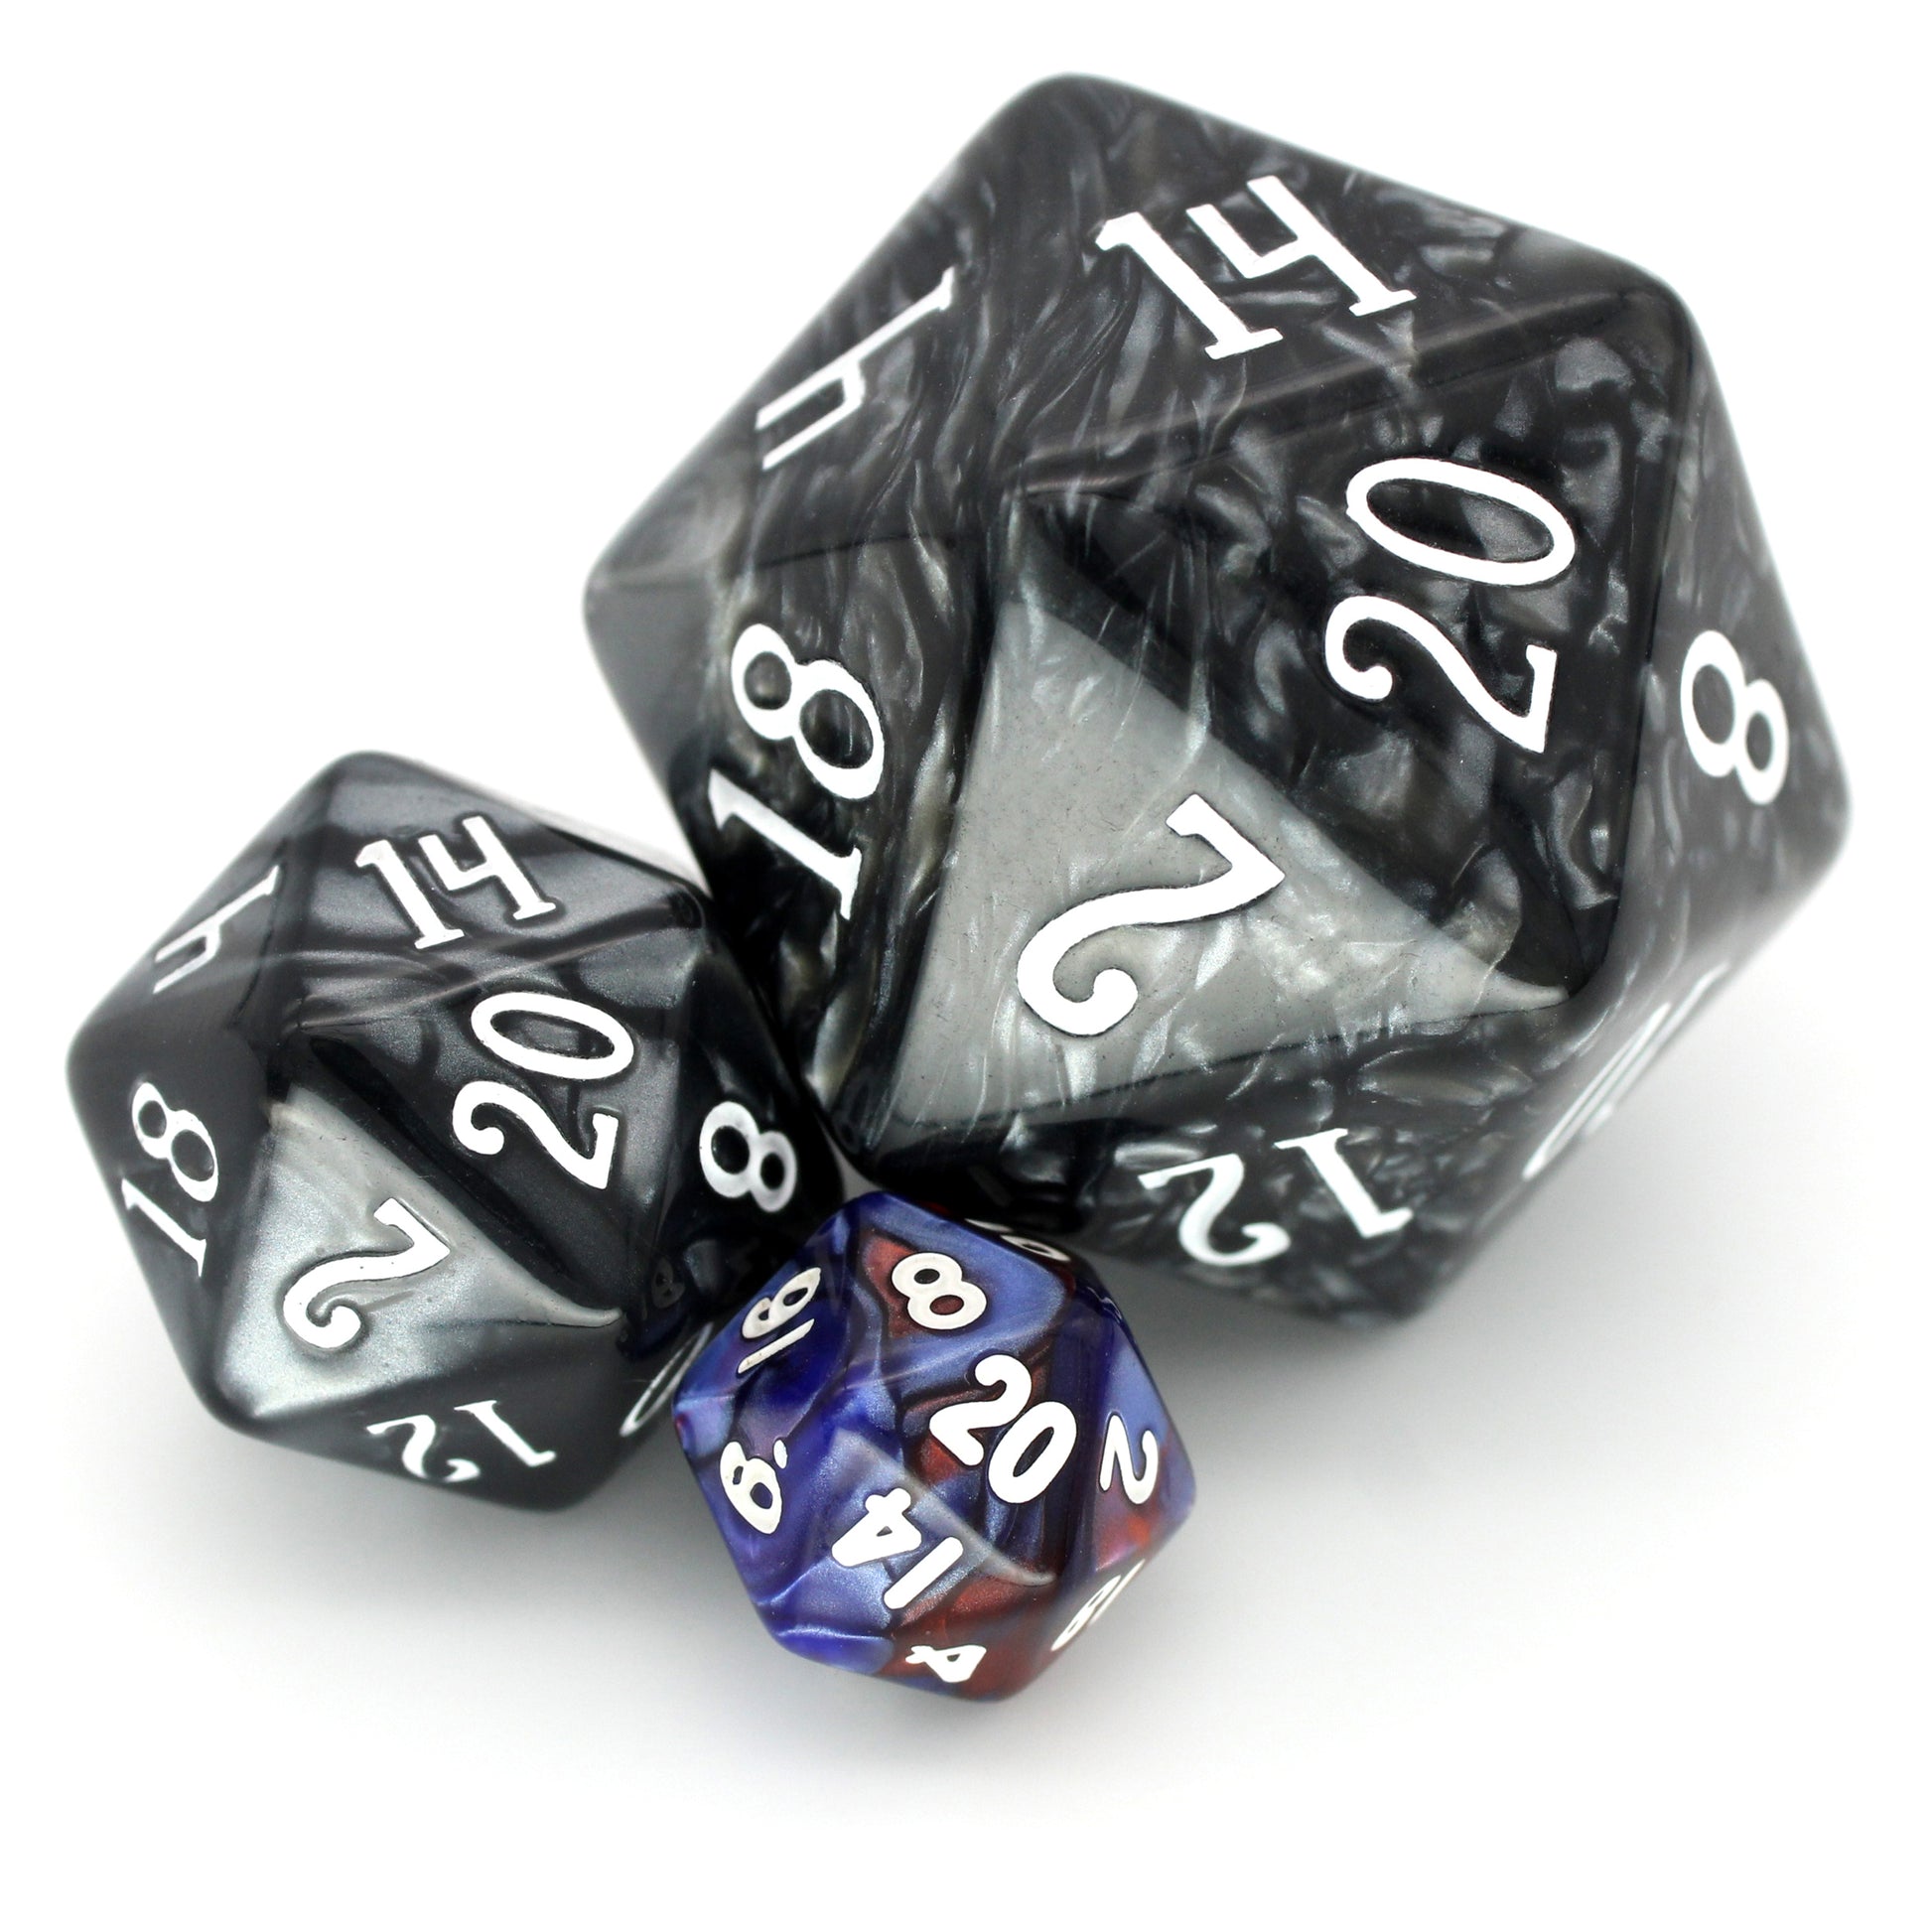 D'stracting is a 7-piece 13mm resin dice set with swirls of shimmery, pearlescent red and blue, with white ink. It belongs to our tiny but mighty Wee Lads collection.